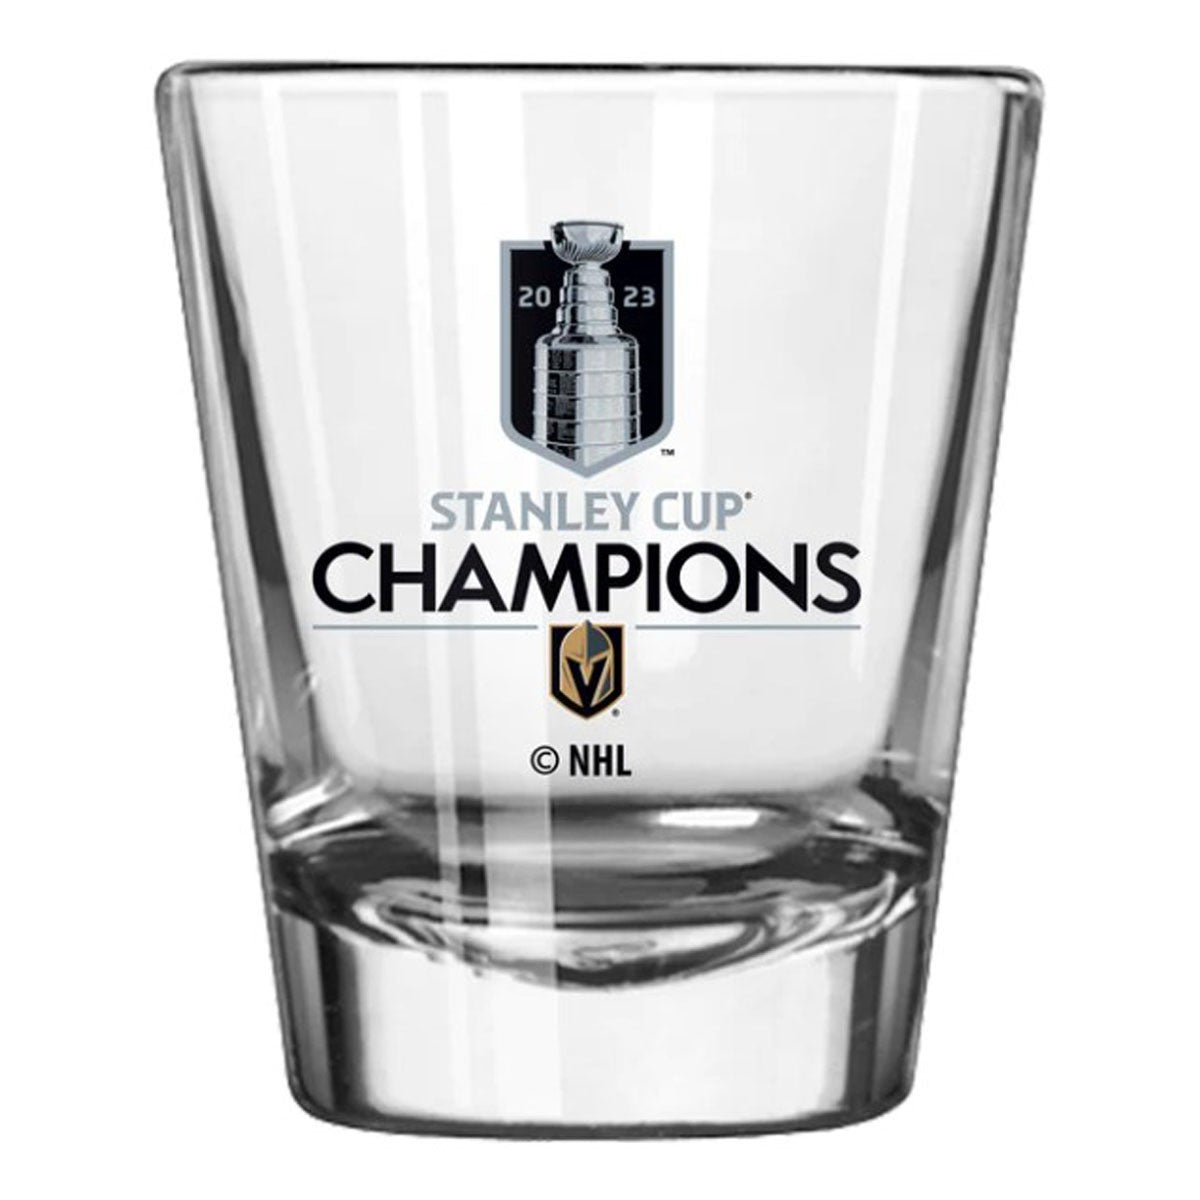 Vegas Golden Knights Stanley Cup Champs 2oz. Shot Glass